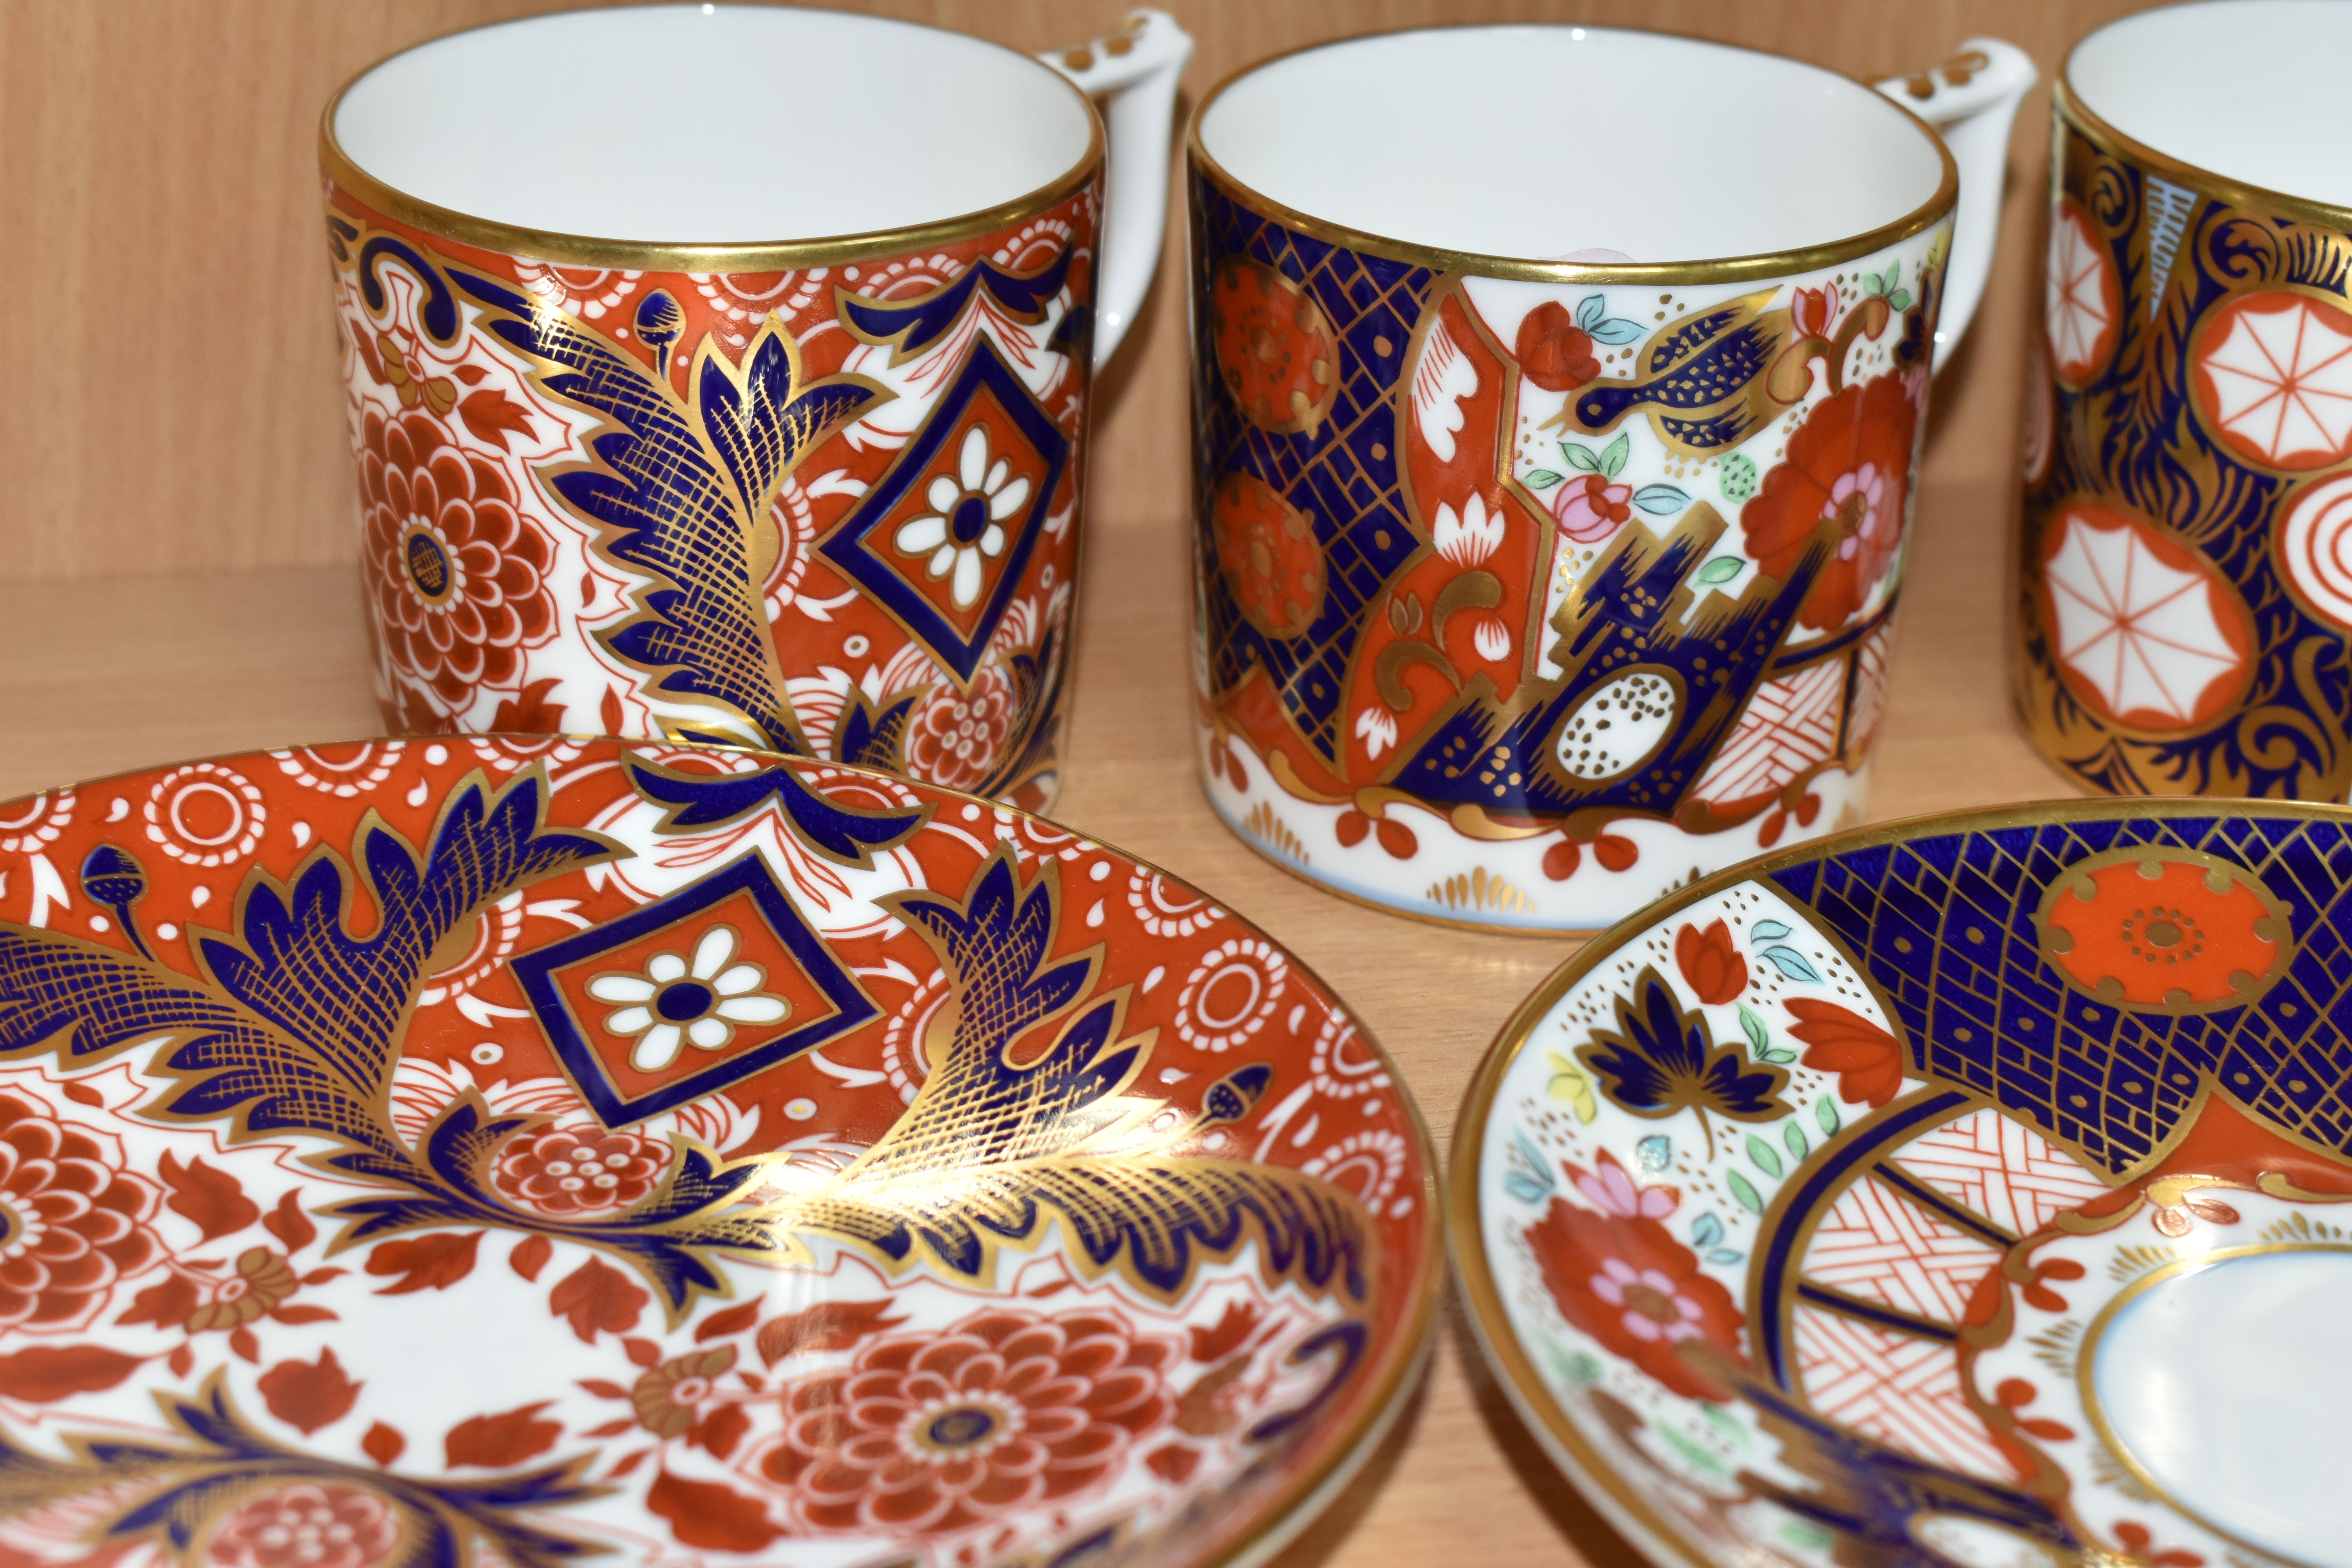 THREE ROYAL CROWN DERBY COFFEE CANS AND SAUCERS, from 'The Curator's Collection' in Rich Japan, - Image 5 of 5